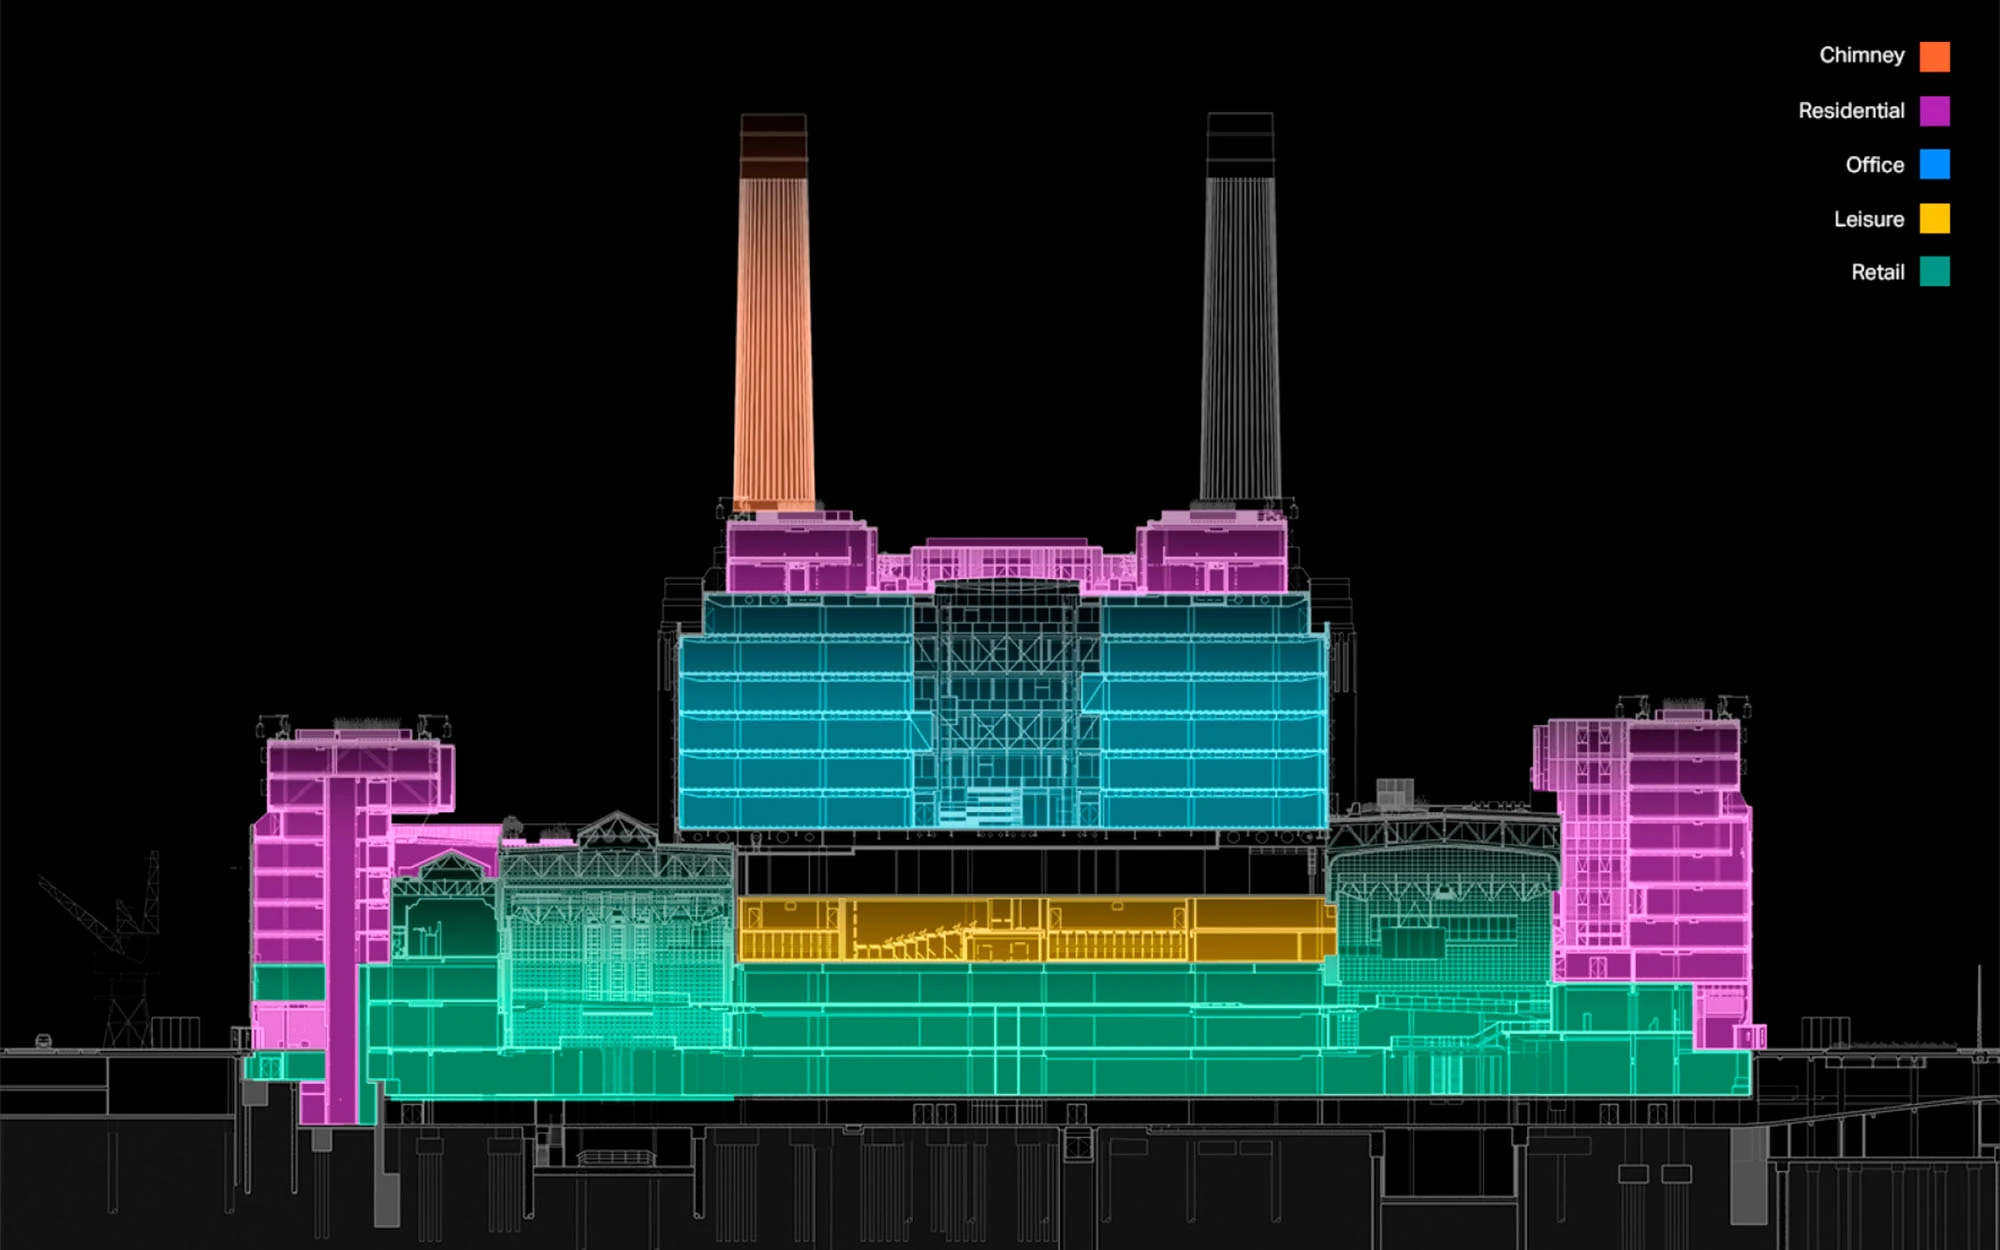 Diagram showing Battersea Power Station sections